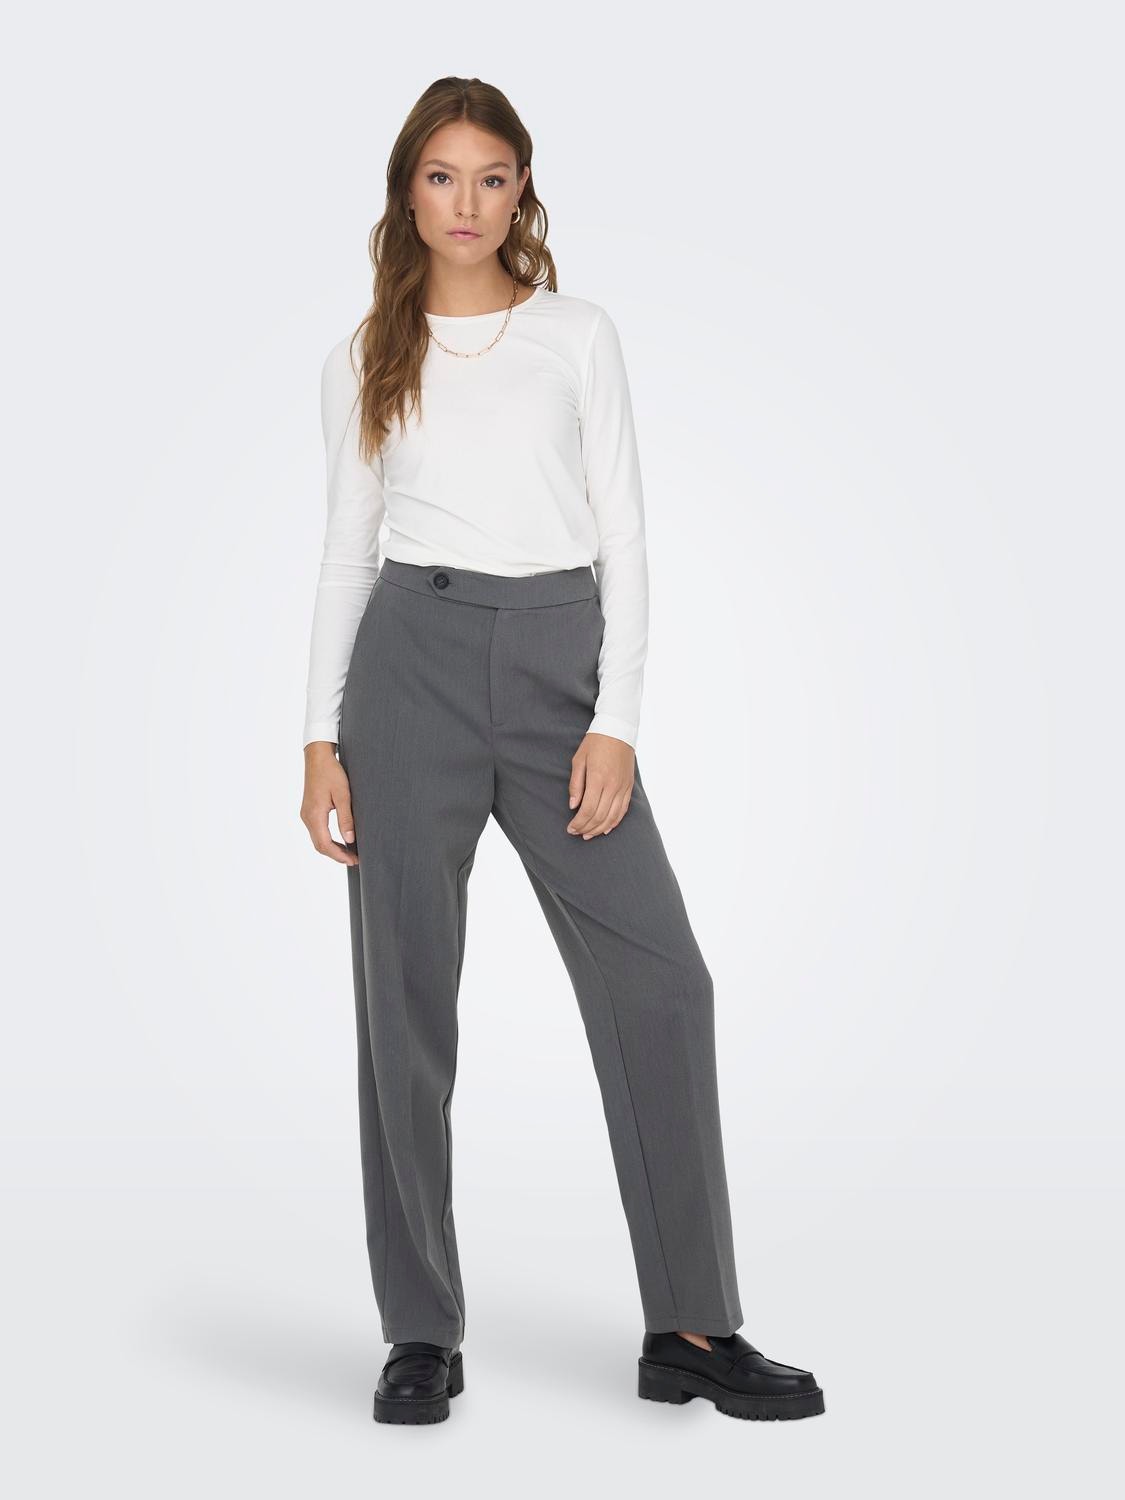 High Waisted Grey Trousers